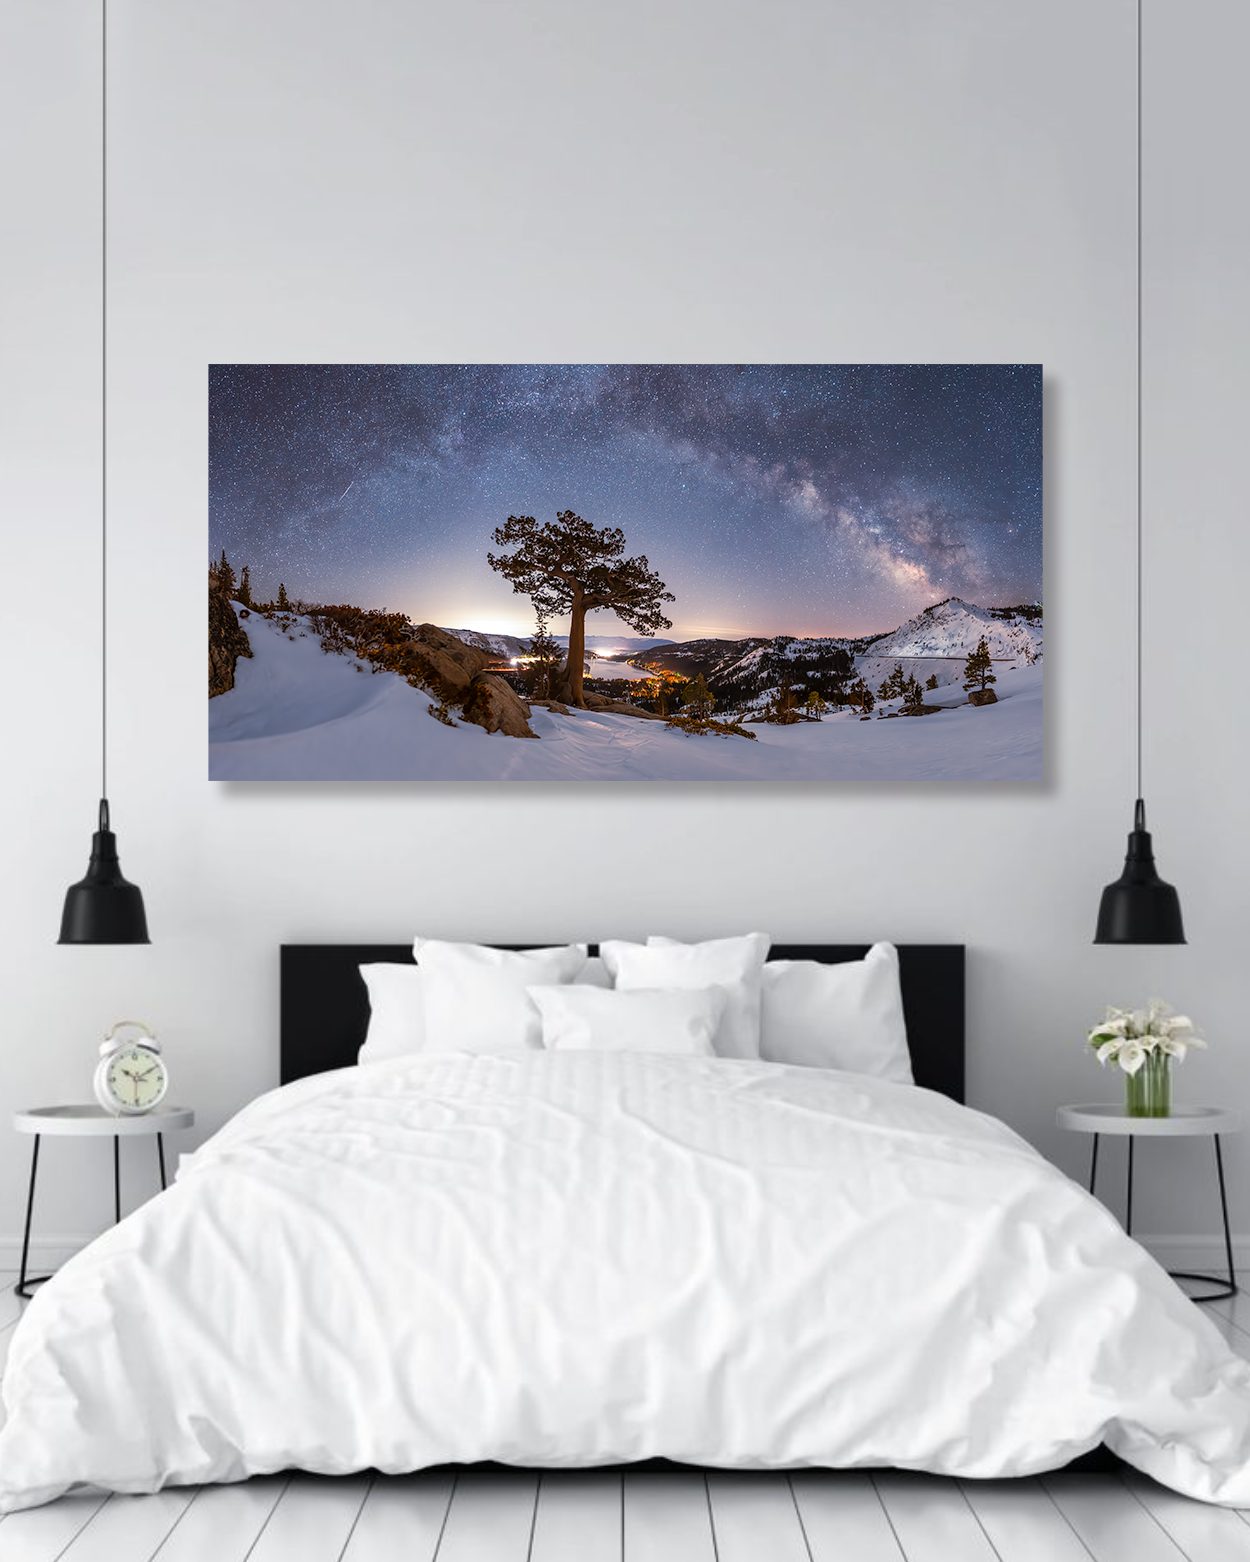 A master bedroom wall is decorated of a photograph showcasing the Milky Way over snowy mountains and Donner Lake.